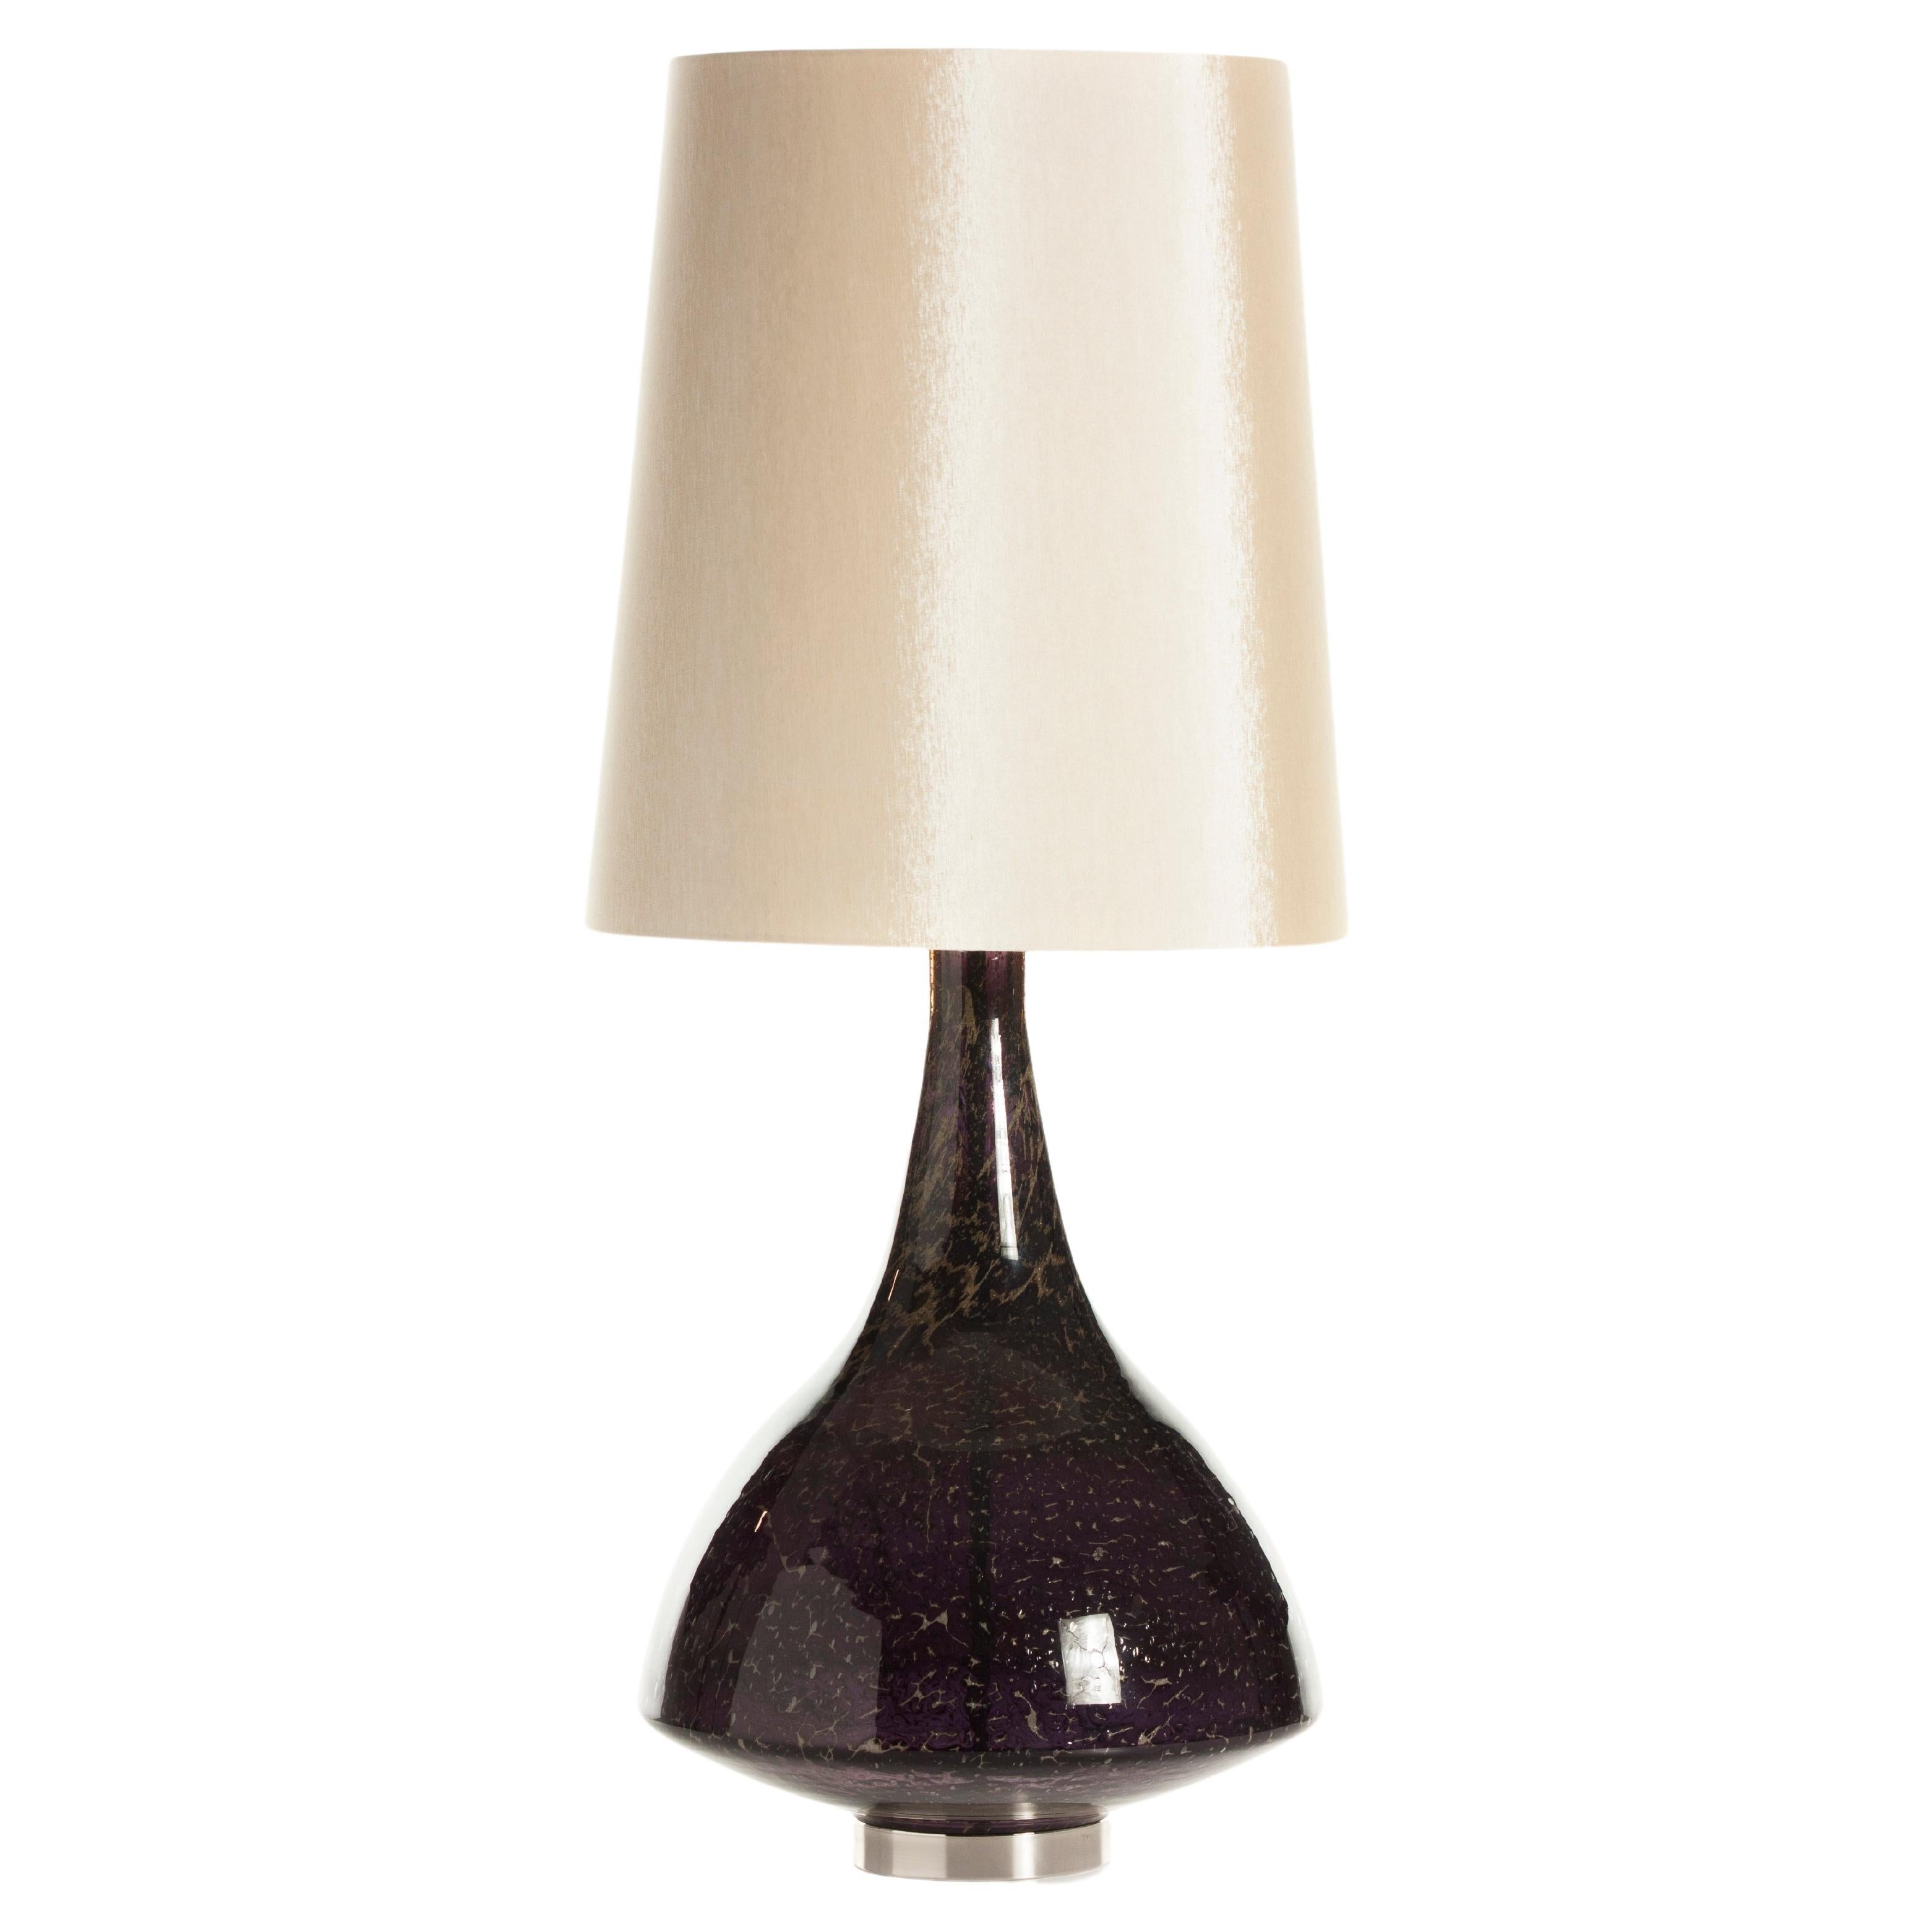 Set/2 Modern Table Lamps, Glass Base, Silk Lampshade, Handcrafted in Portugal - Europe by GF Modern.

This is an elegant table lamp and an attractive addition to a modern home. The black glass and polished stainless steel gracefully combine with the